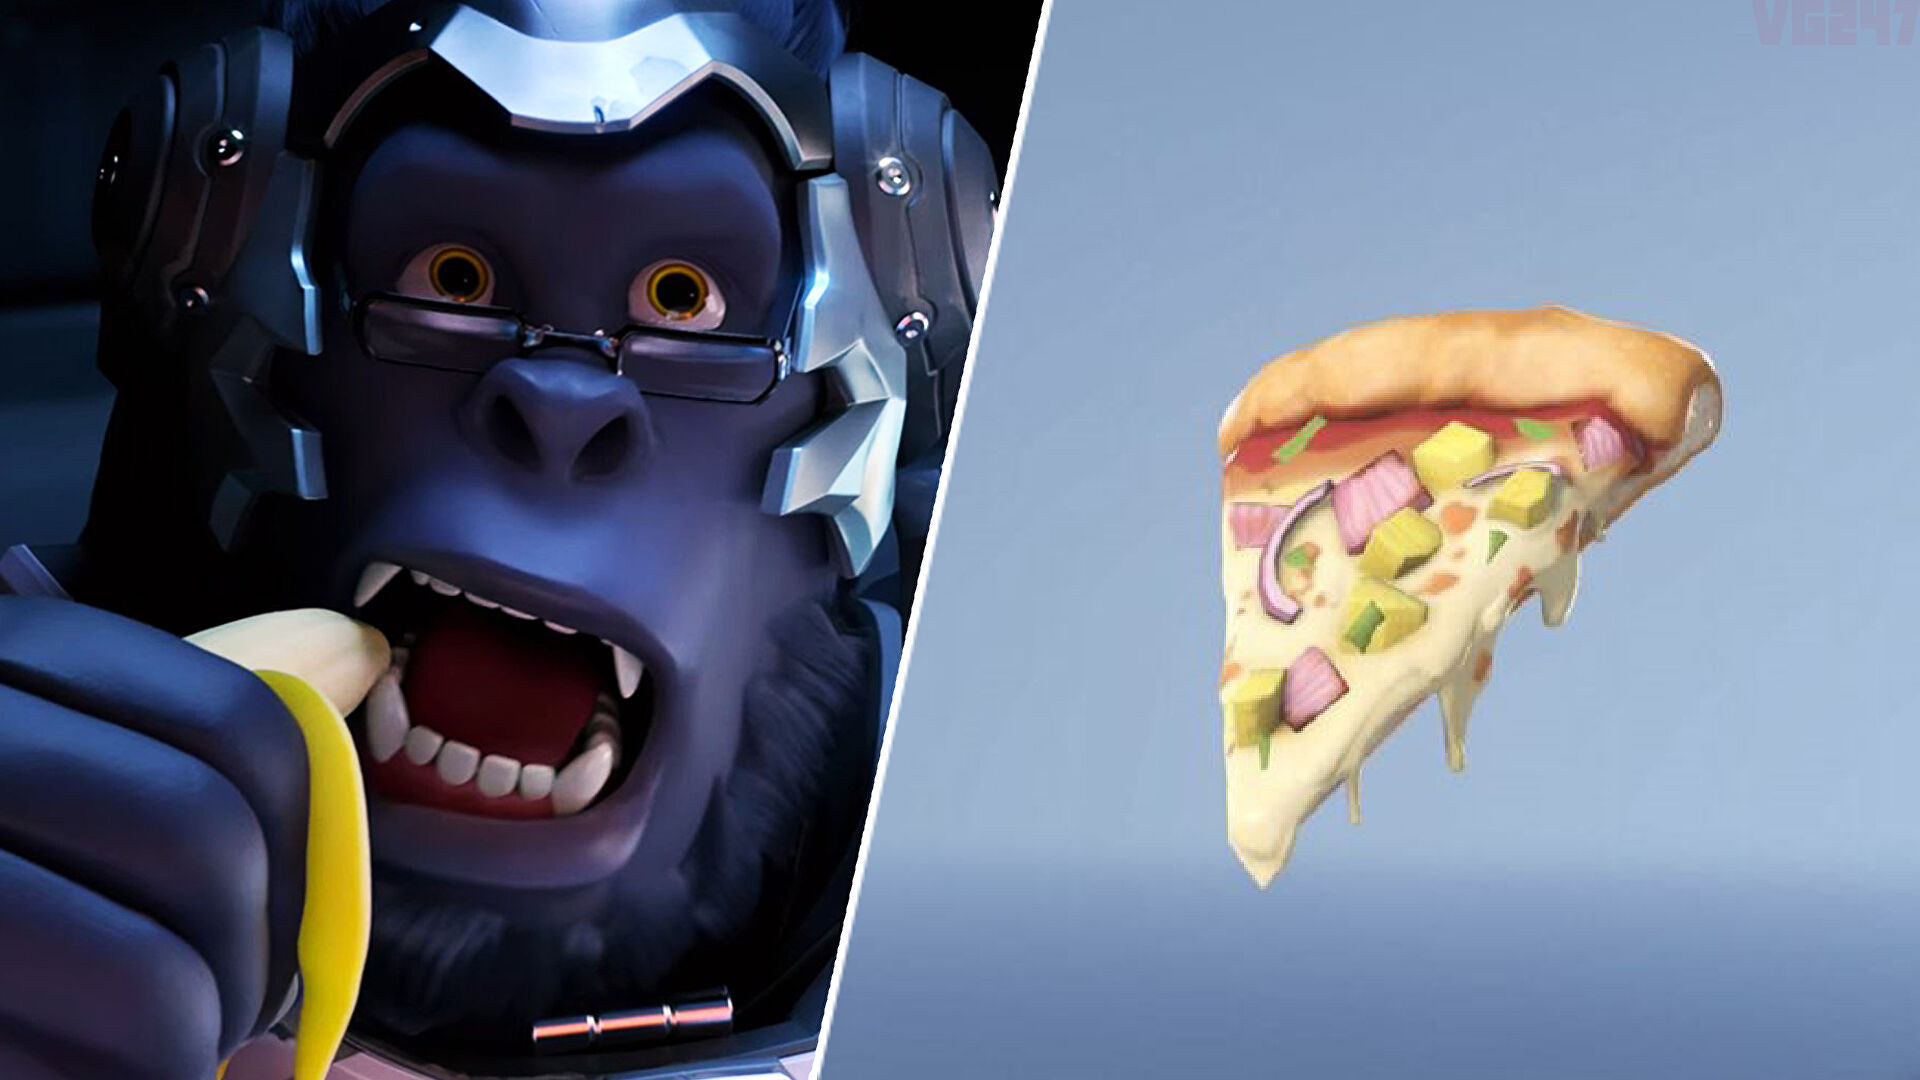 Reddit Overwatch 2 poster expresses malcontent by turning original game’s disc into pizza cutter